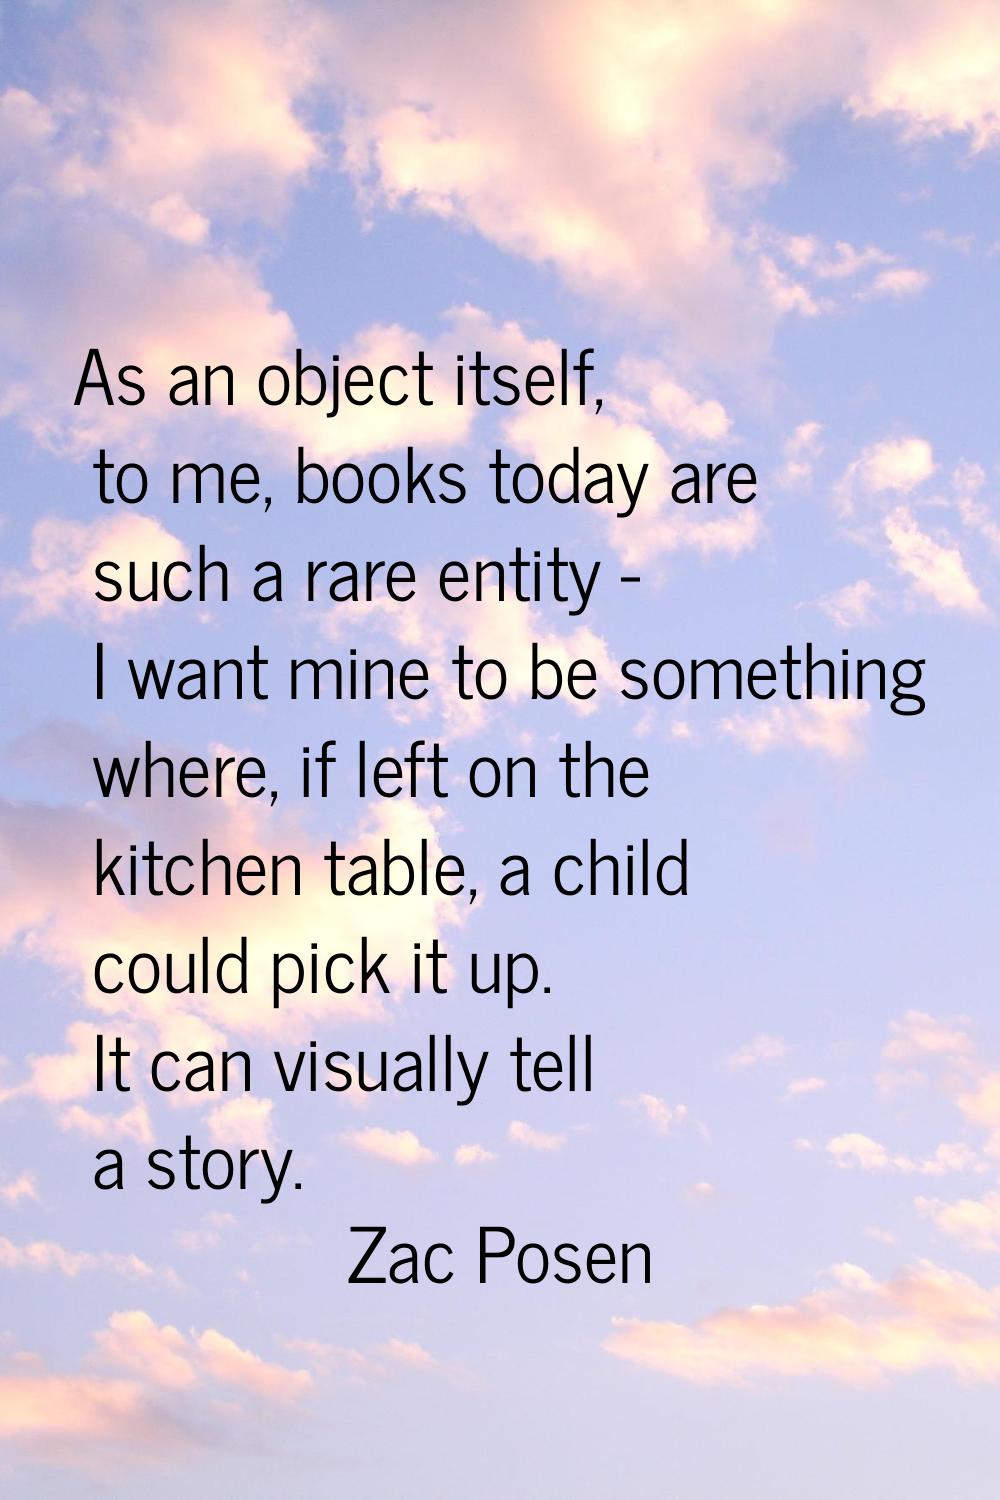 As an object itself, to me, books today are such a rare entity - I want mine to be something where,